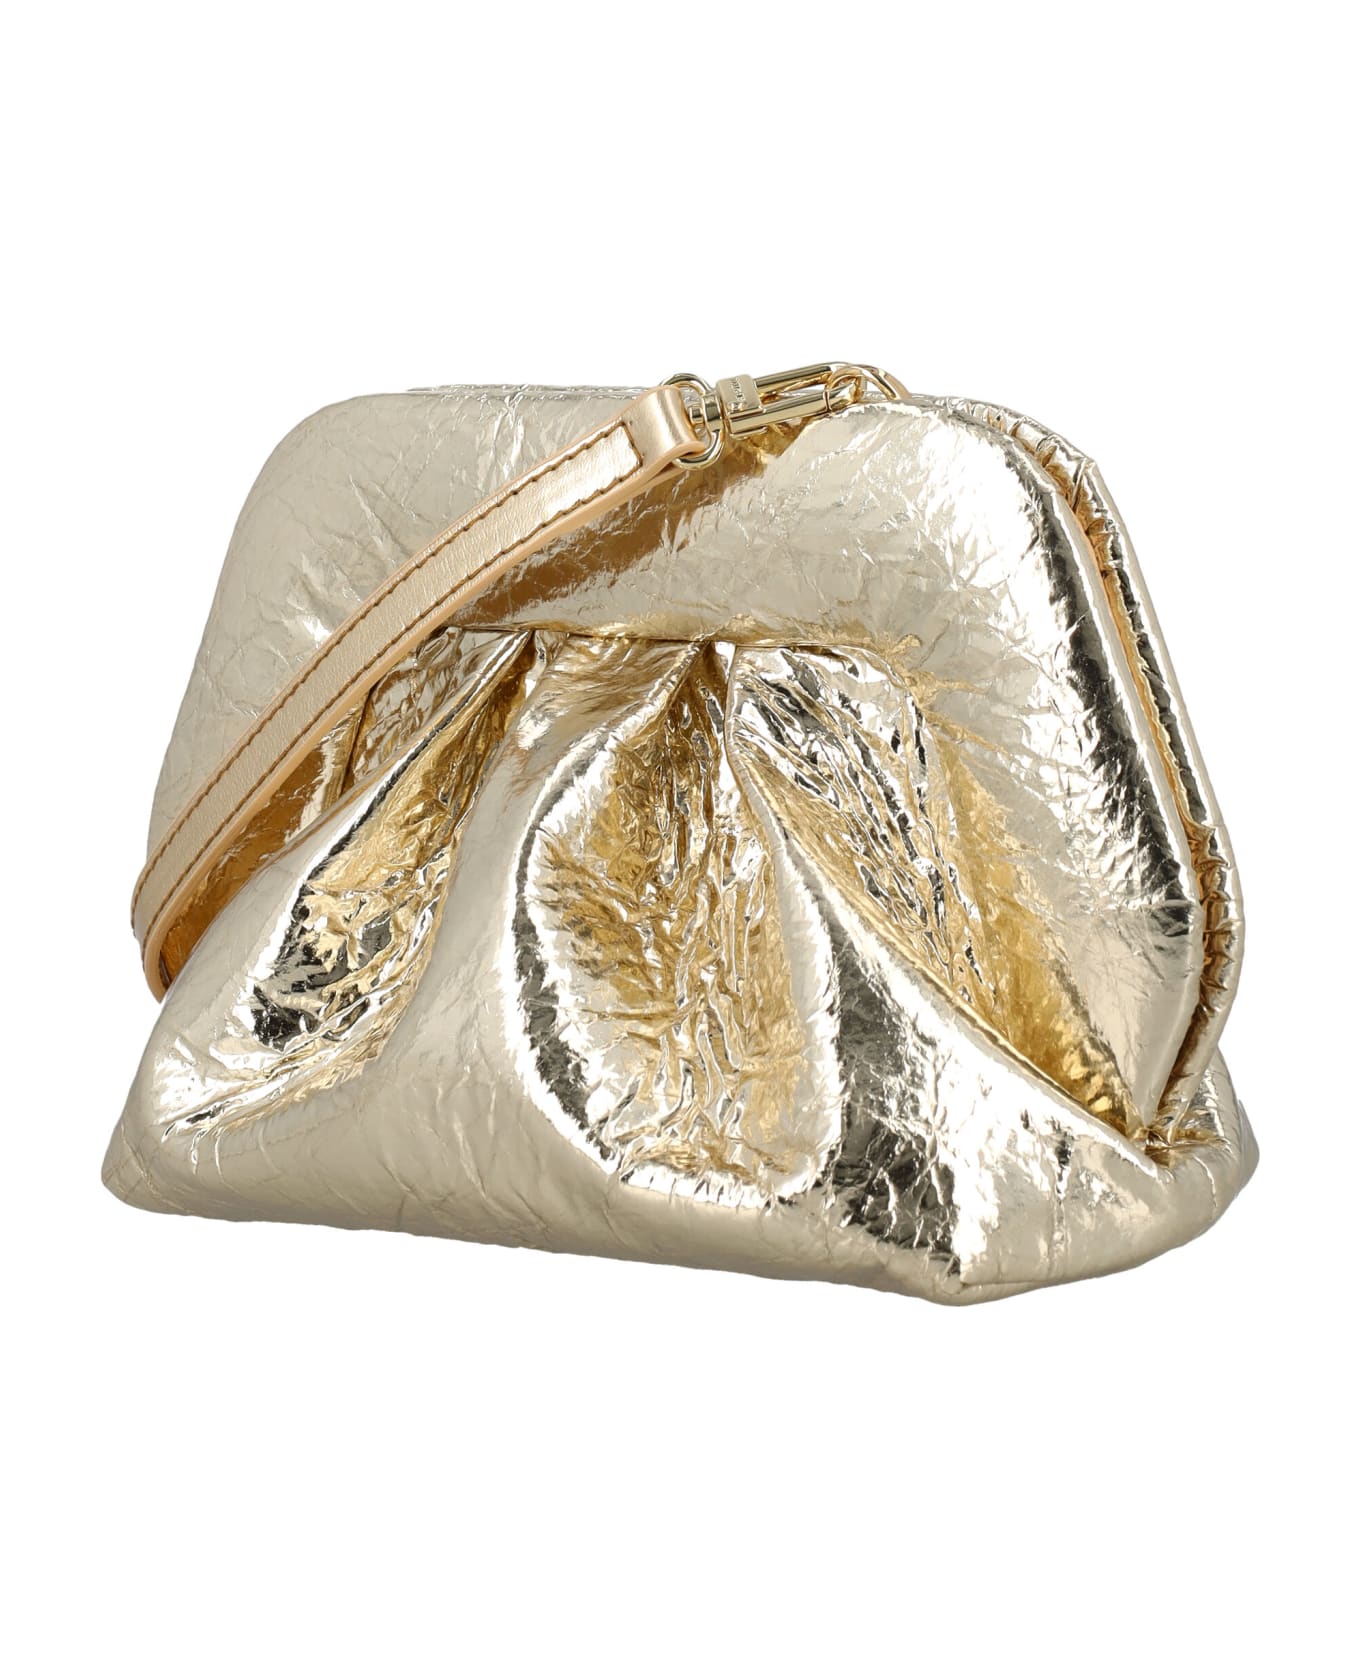 THEMOIRè Gea Clutch Pineapple Leather - GOLD クラッチバッグ